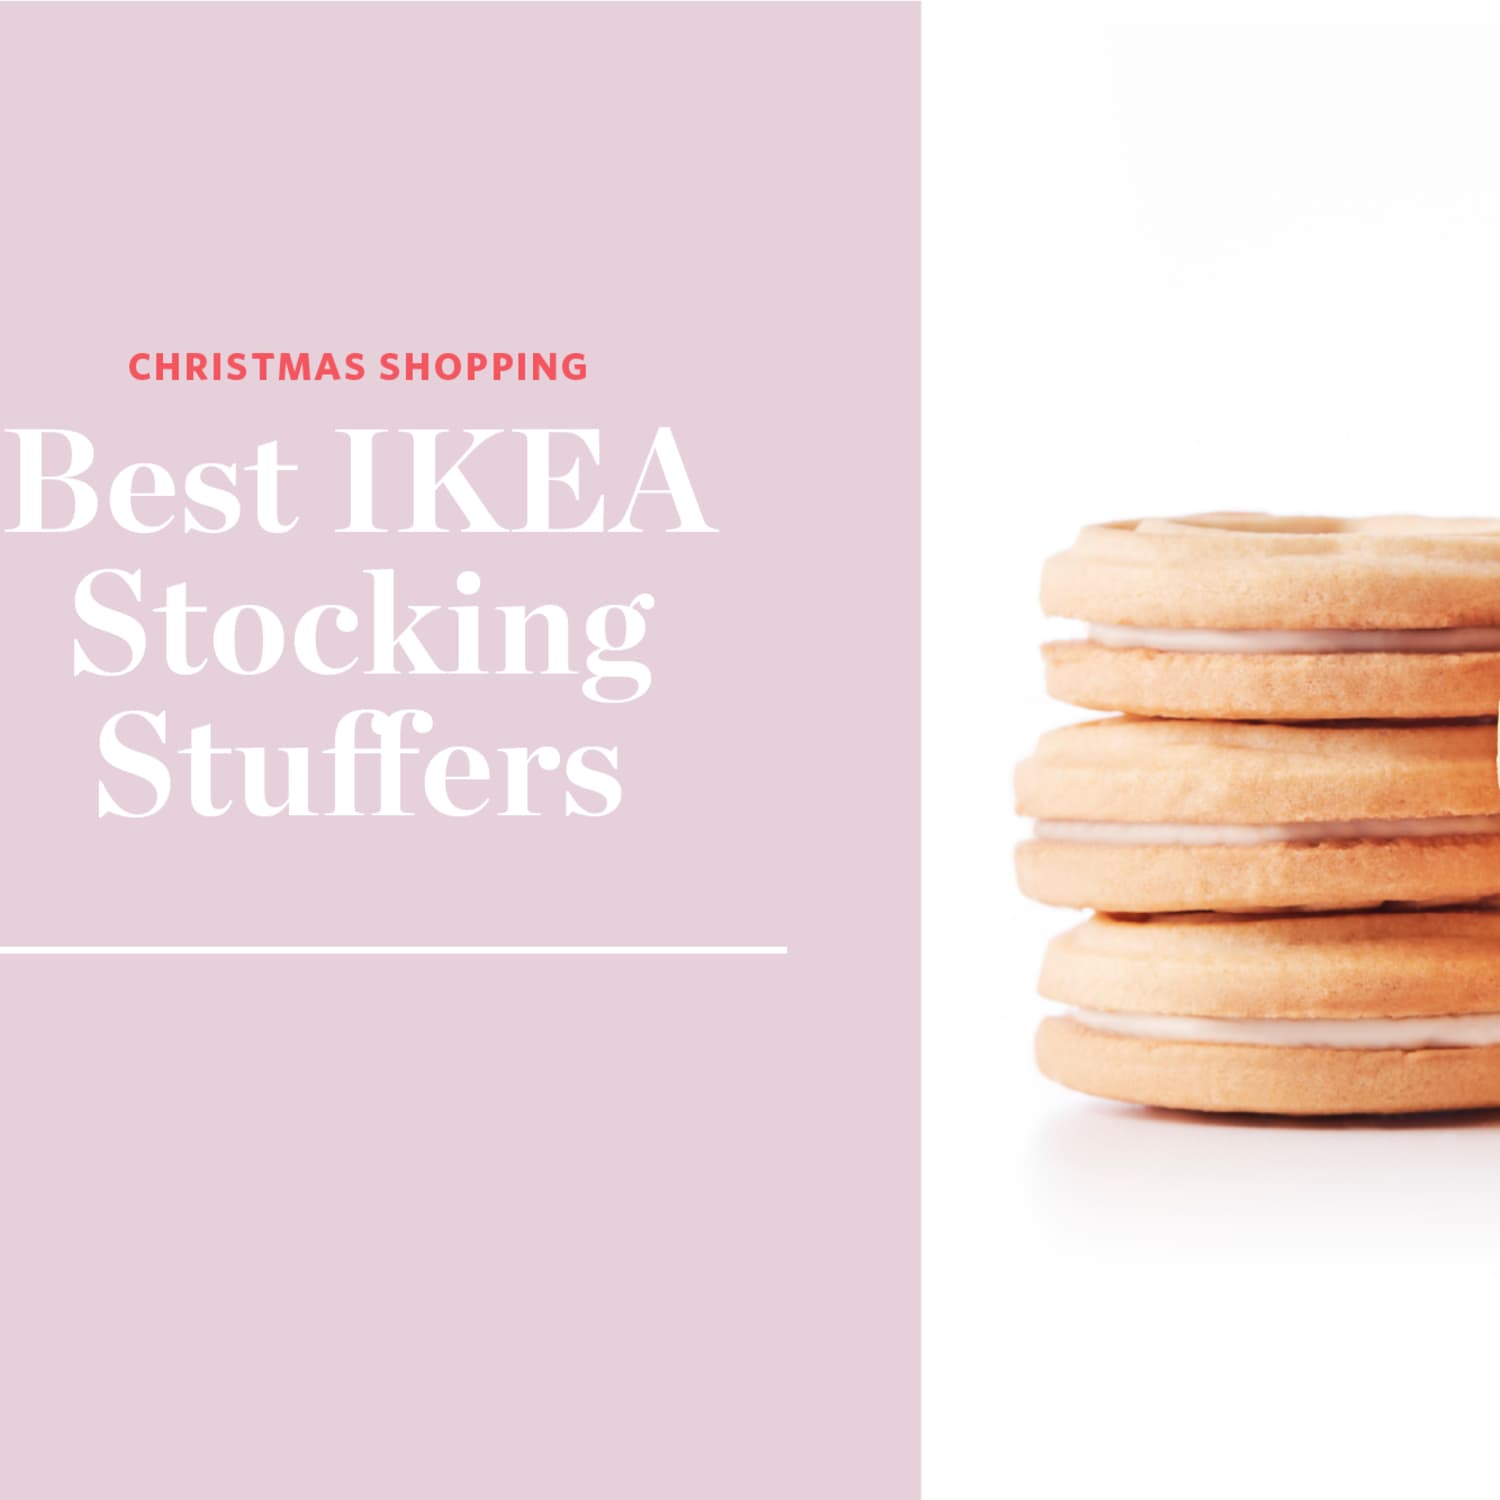 The 10 Best Stocking Stuffers to Pick Up at IKEA